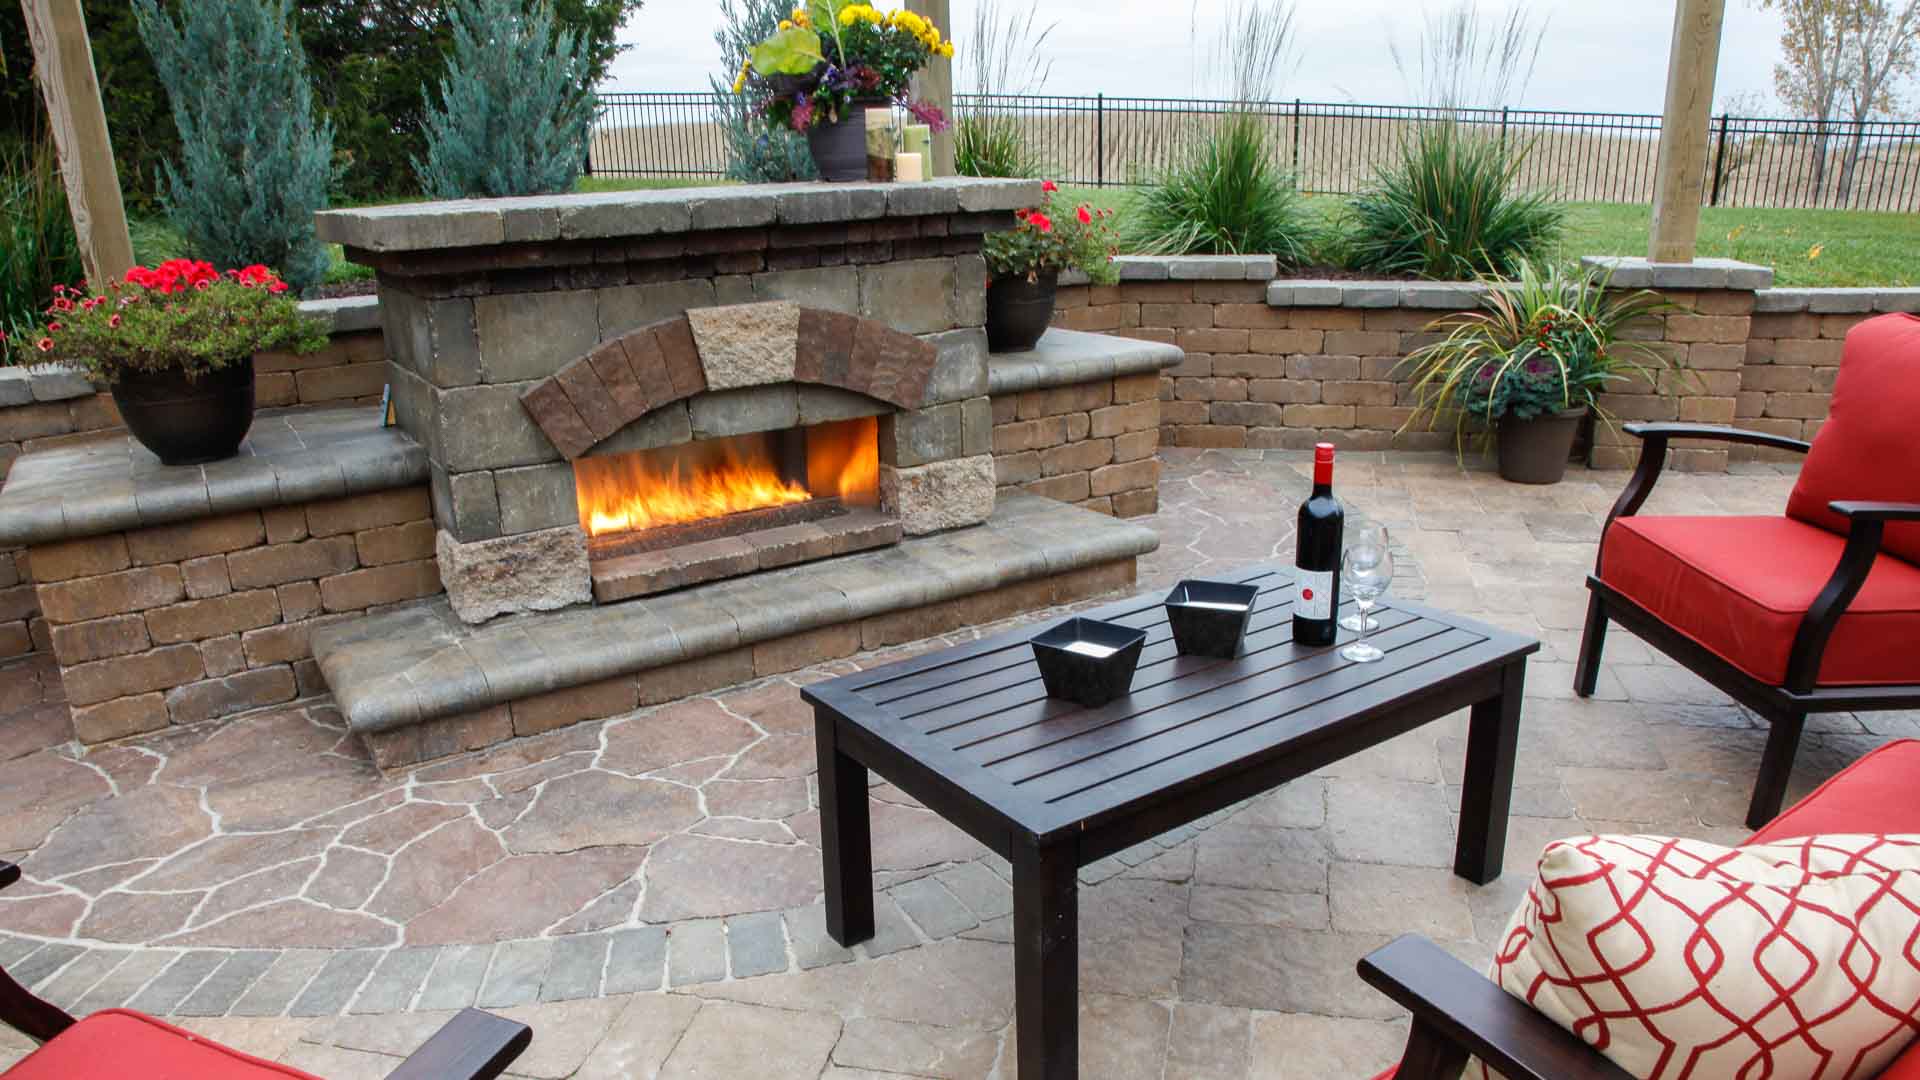 Forever Green Coralville Iowa patio fireplace landscaping iowa city outdoor living